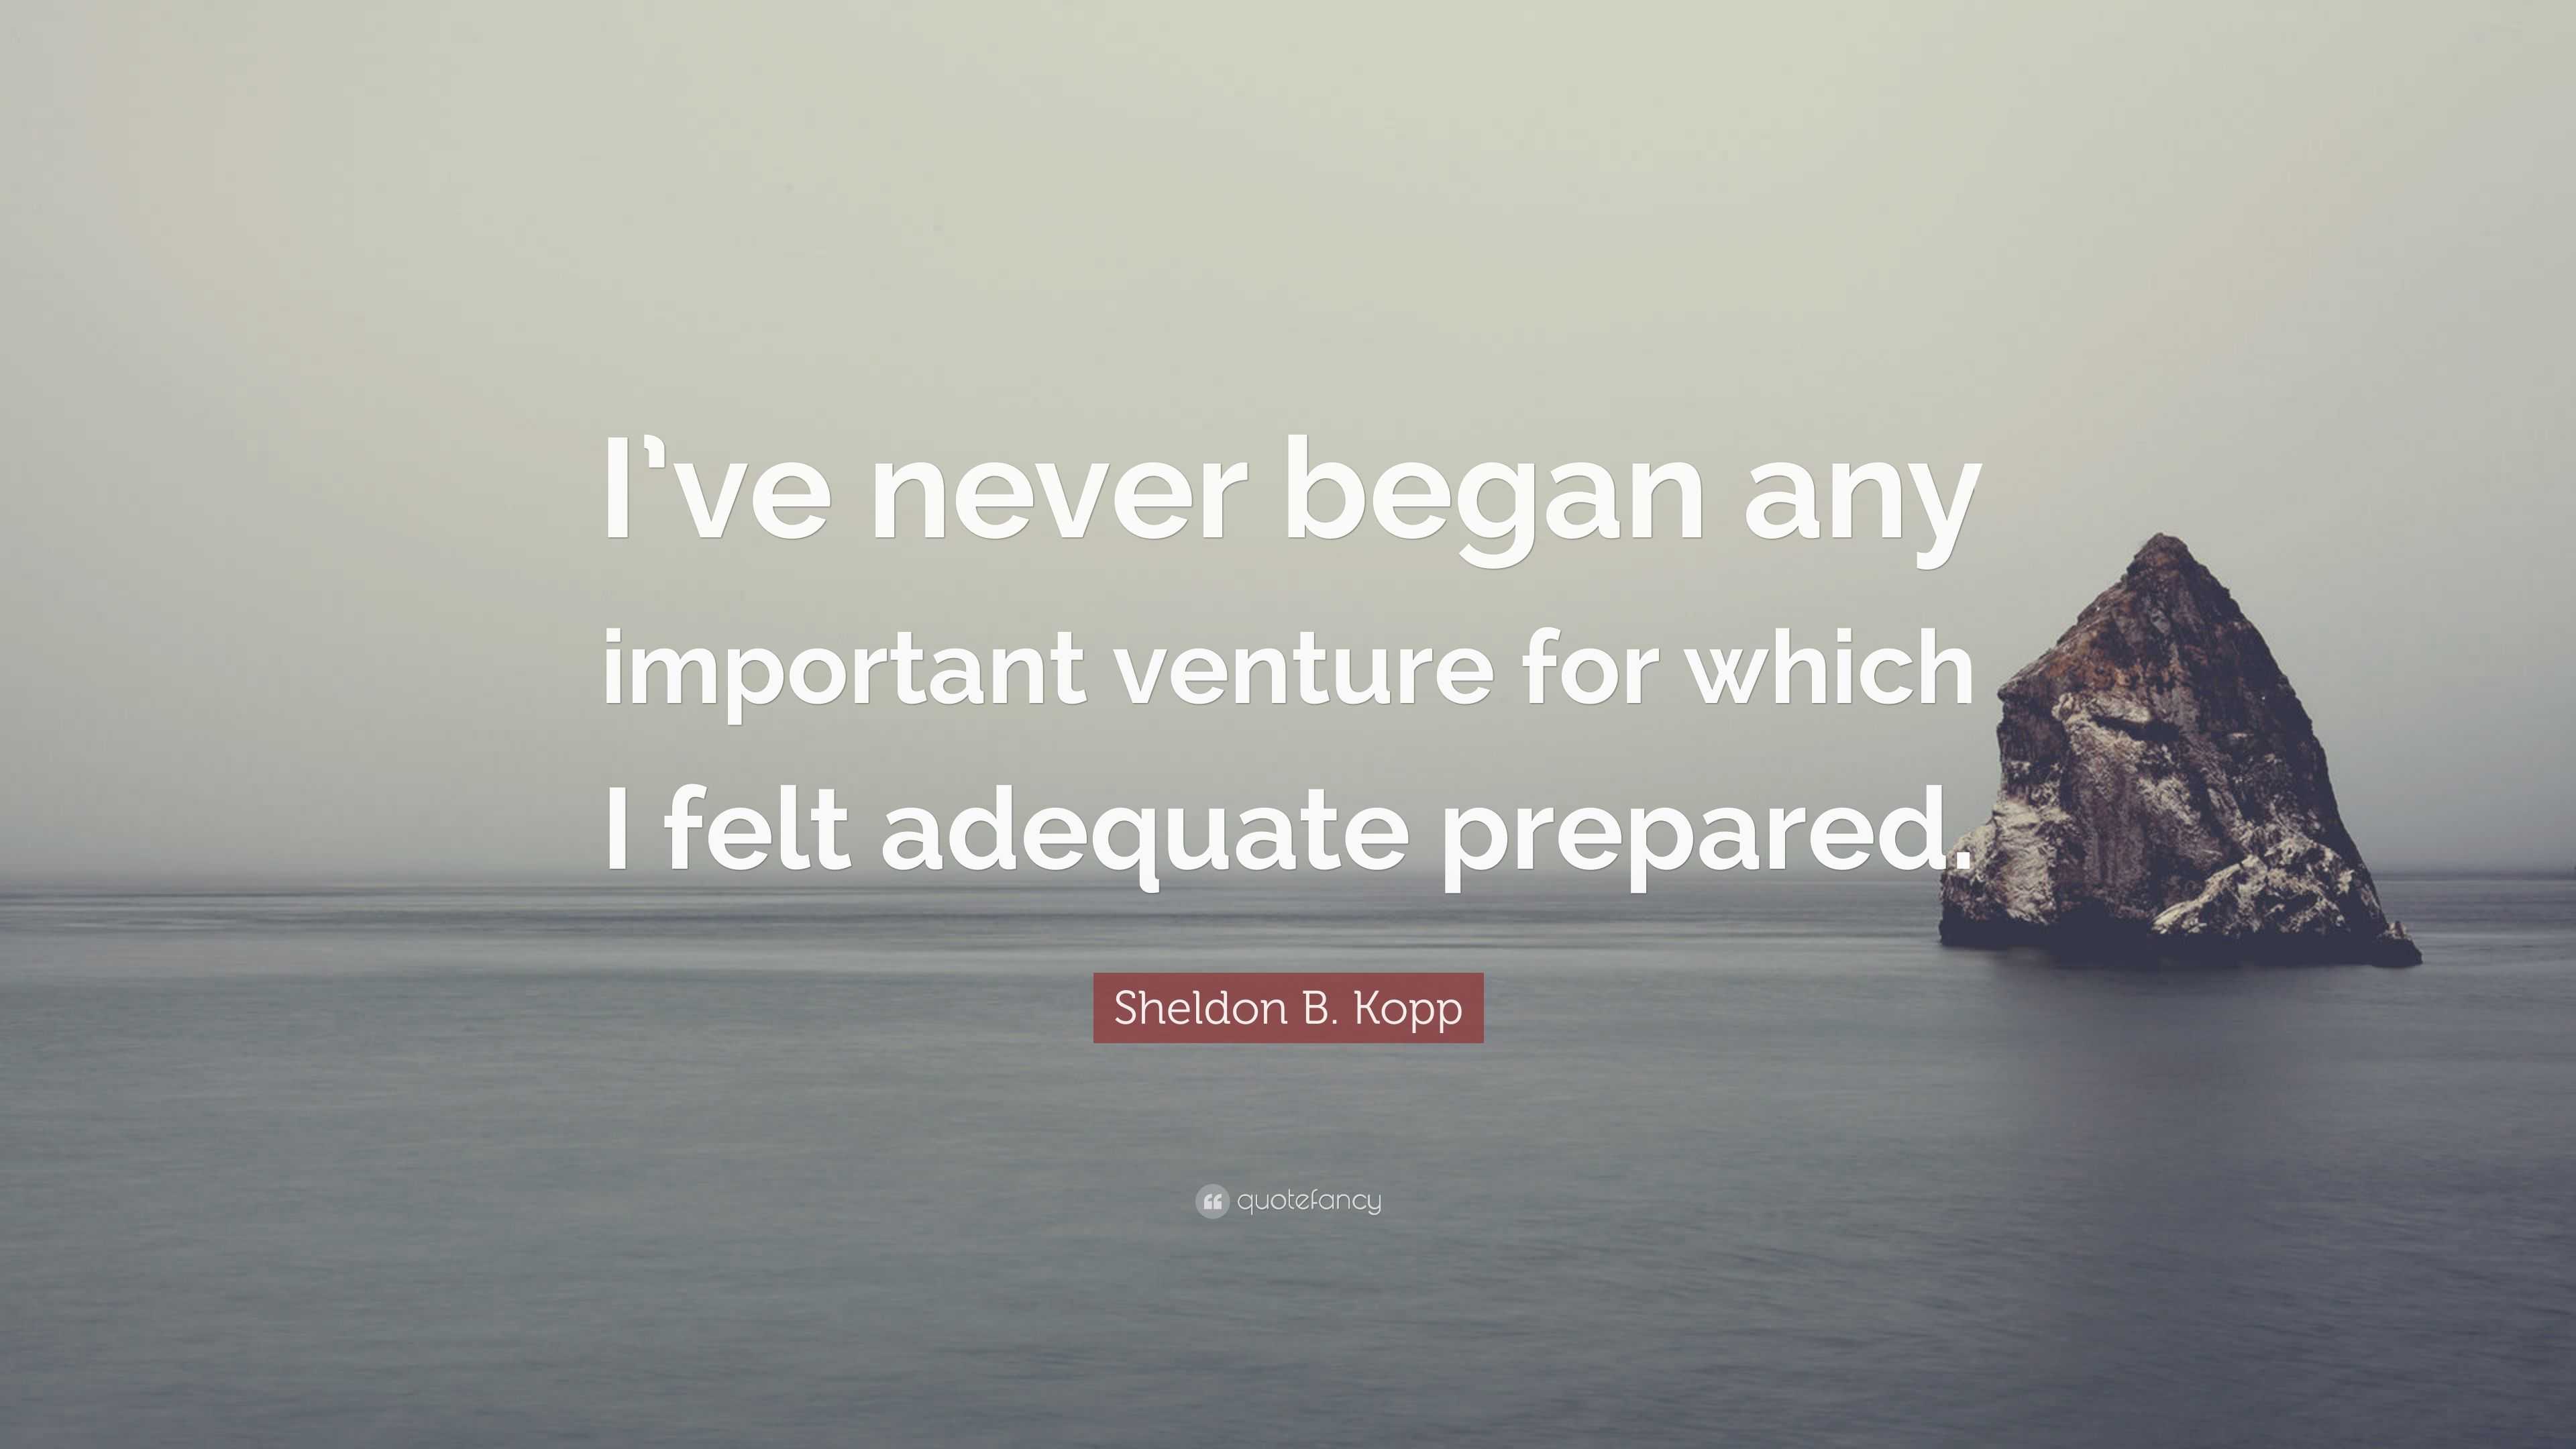 I’ve never began any important venture for which I felt adequate prepared. 